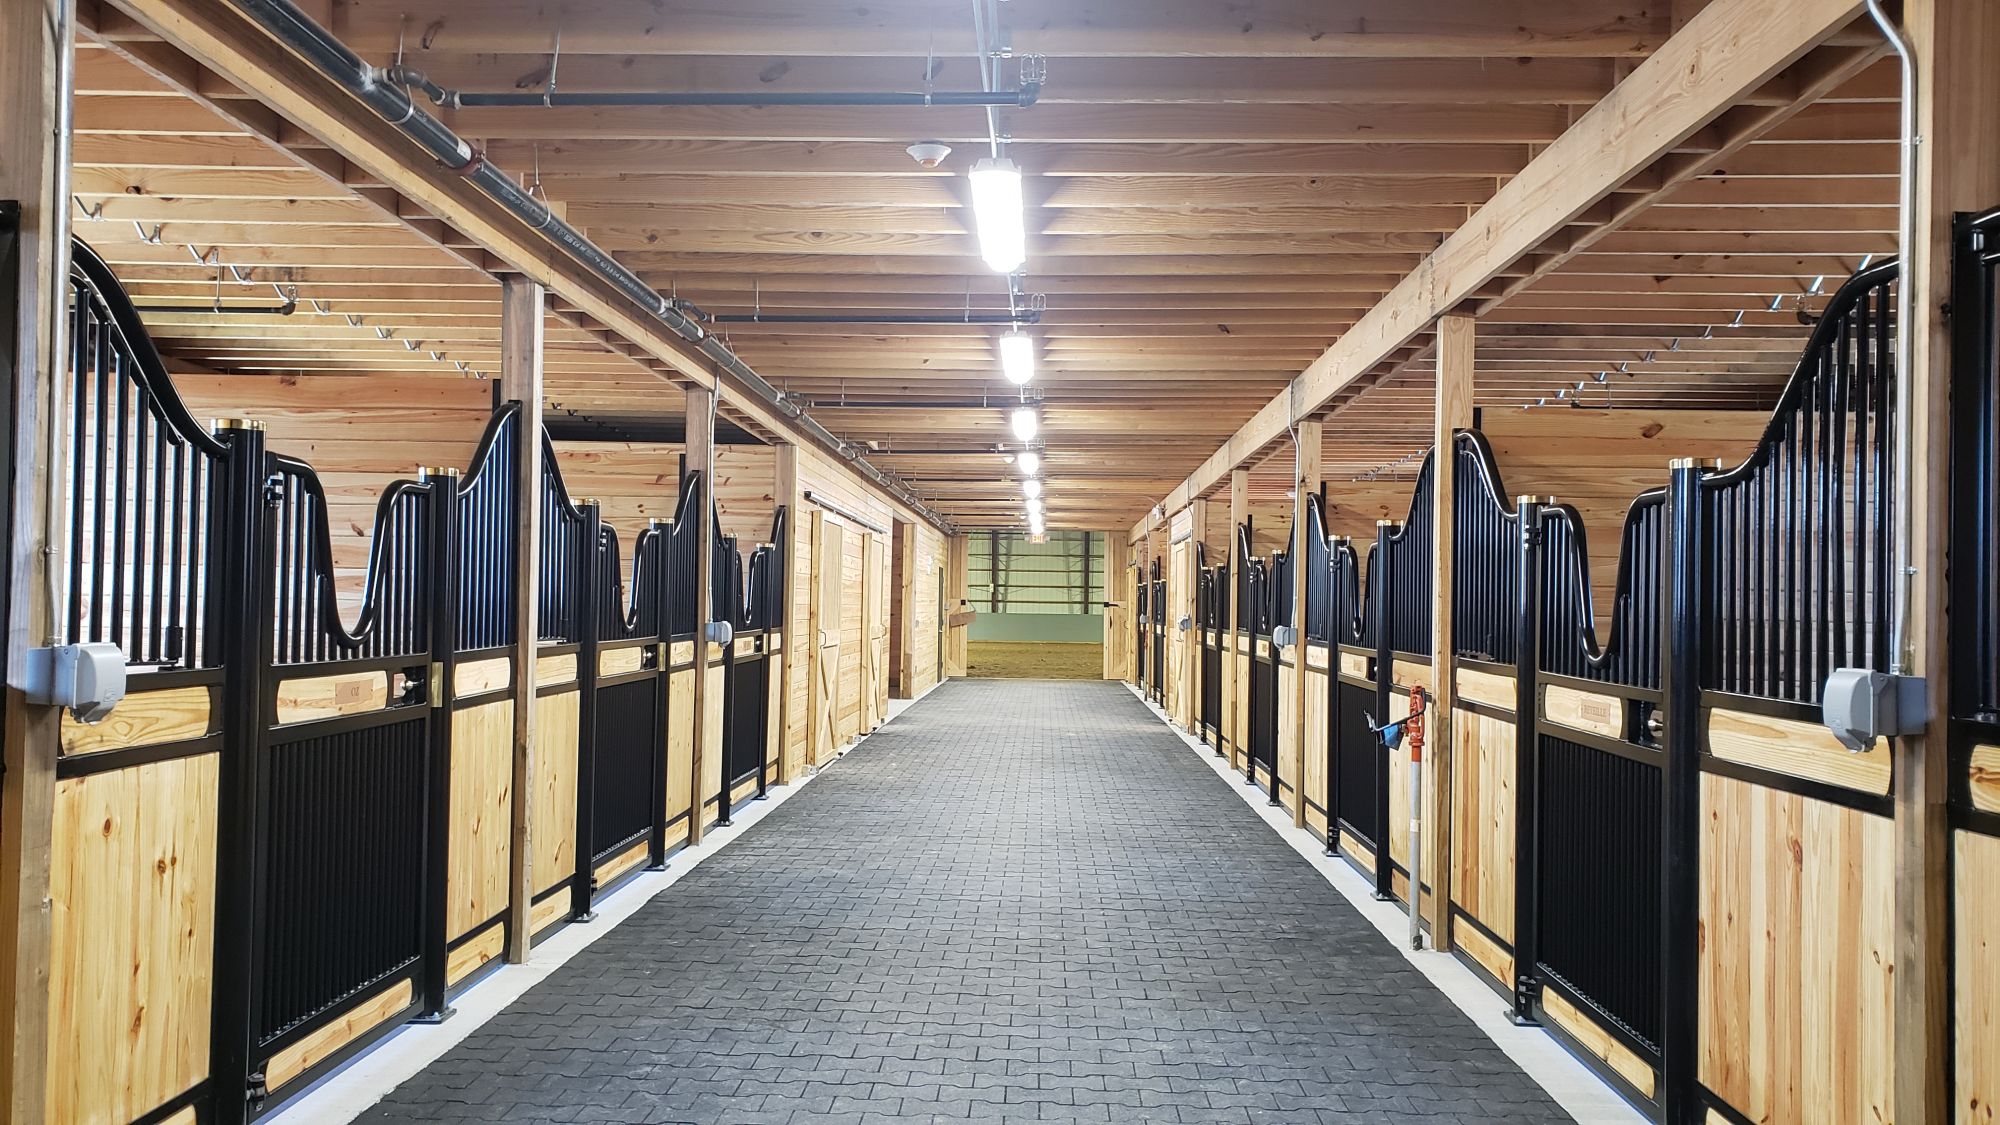 Interior Stables - Completed - January 2021